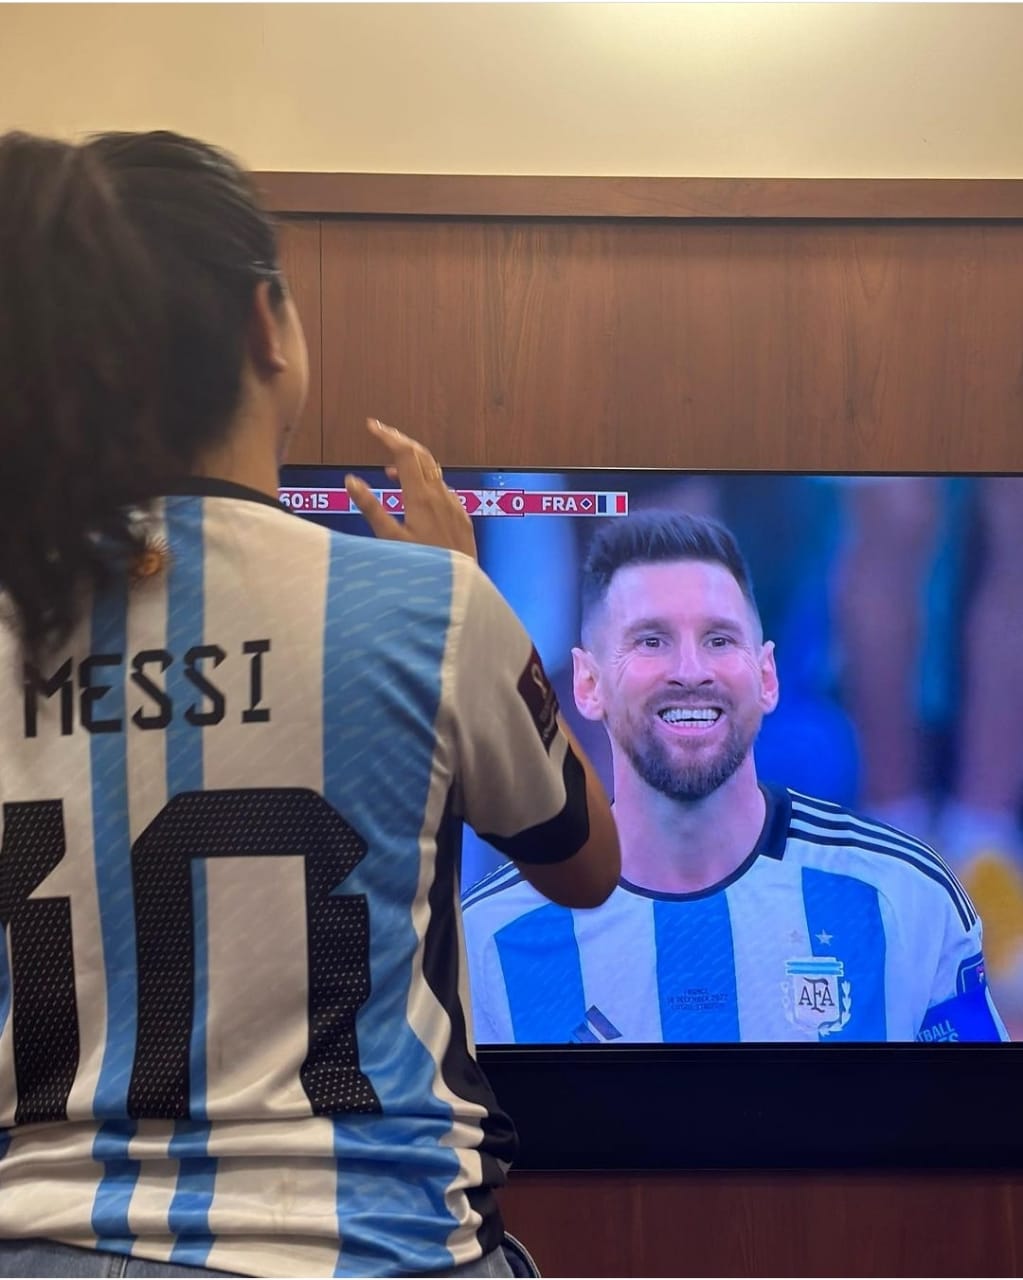 Keerthy Suresh Fan Girl Moment of Lionel Messi Argentina